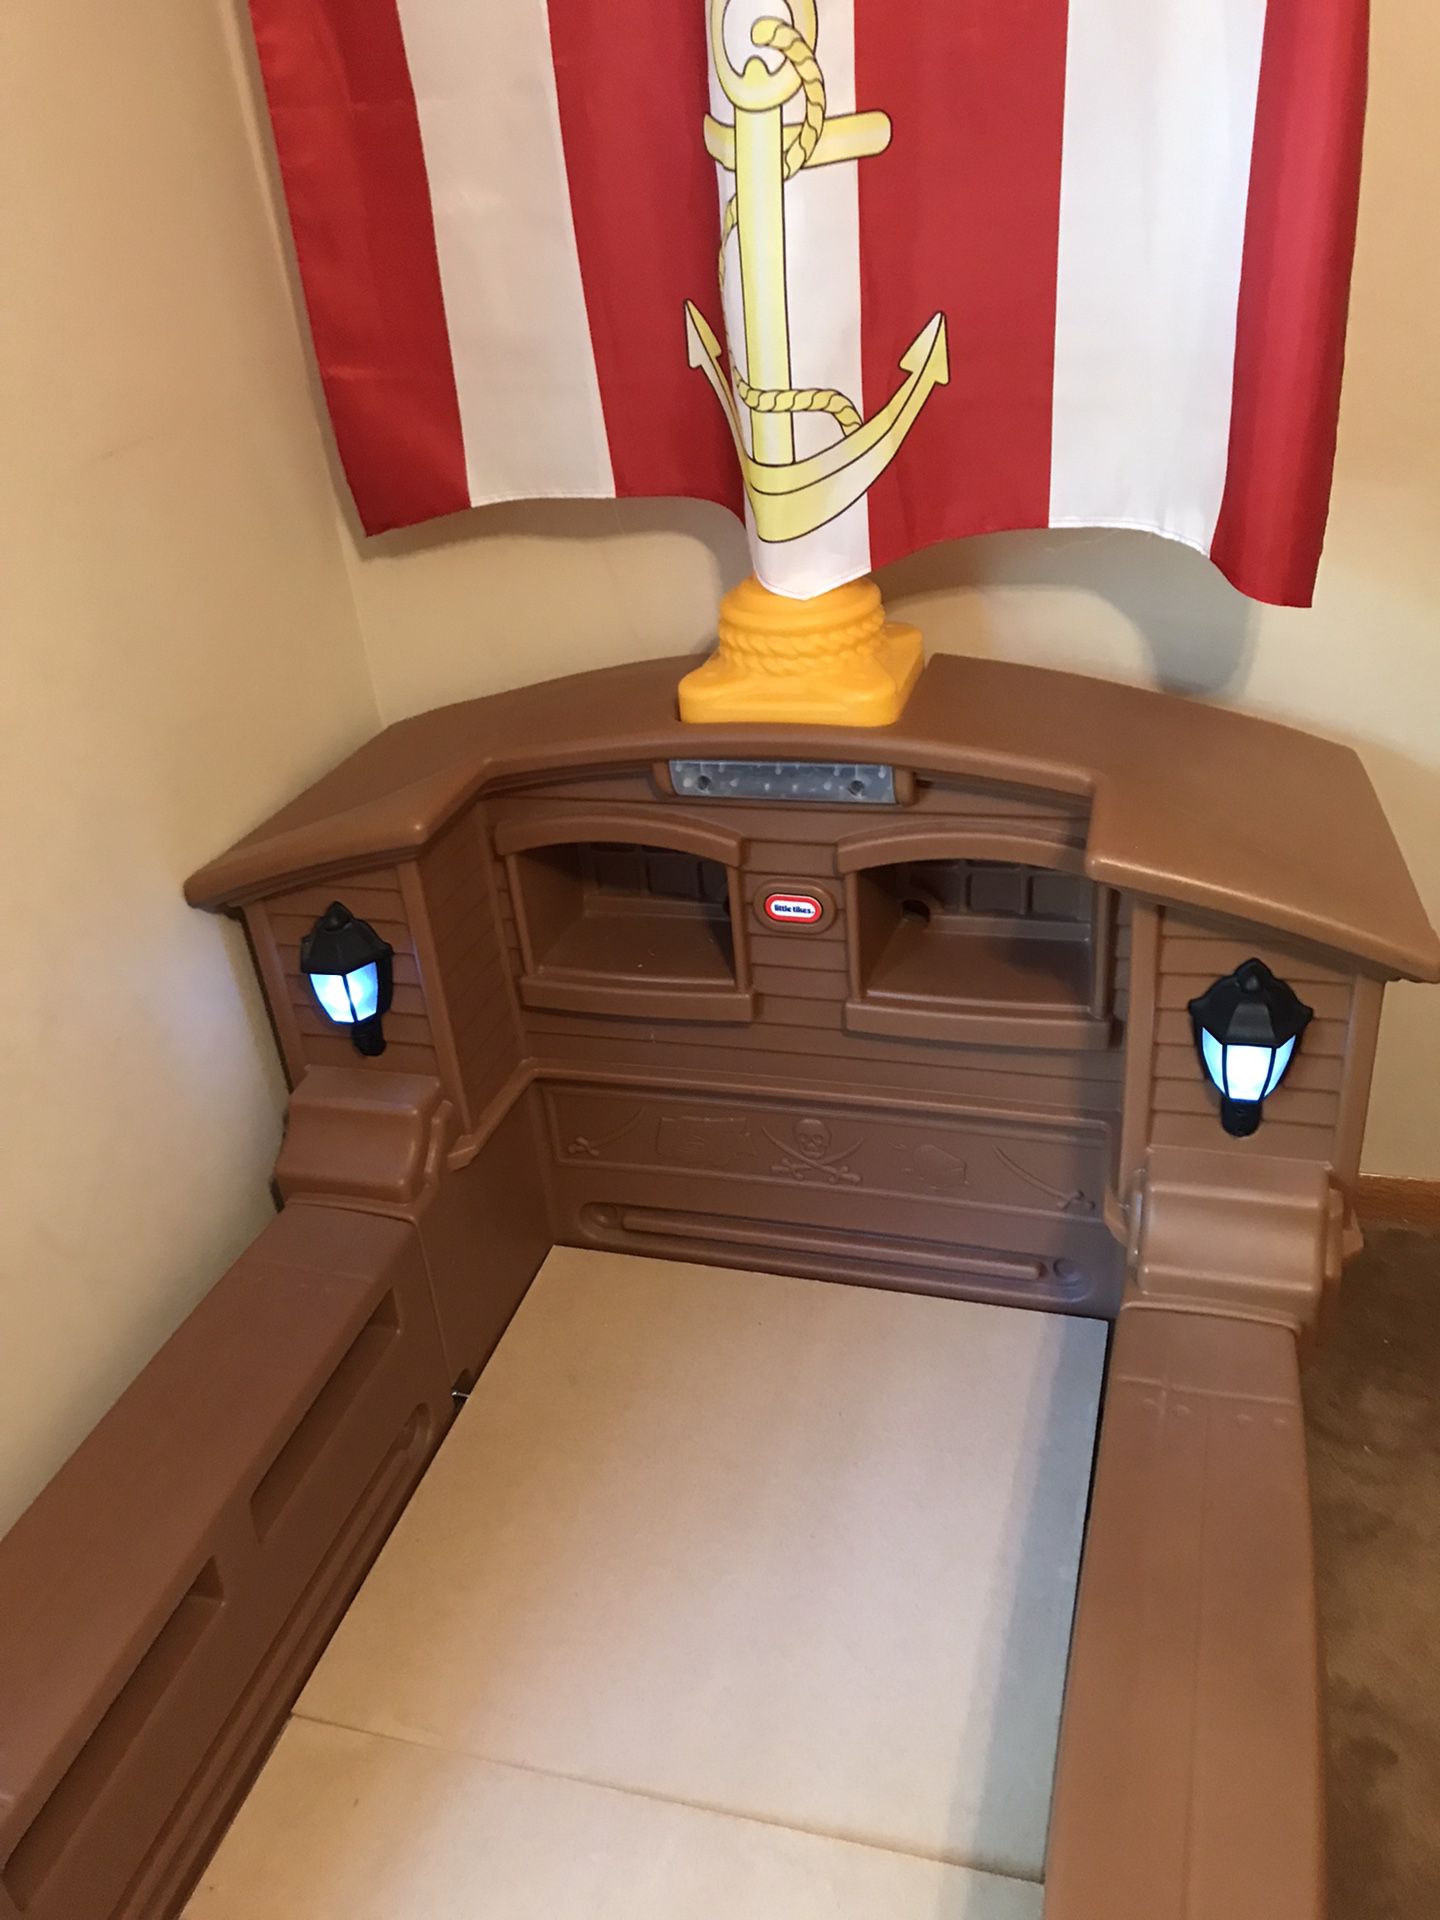 Little Tykes Pirate Ship Bed